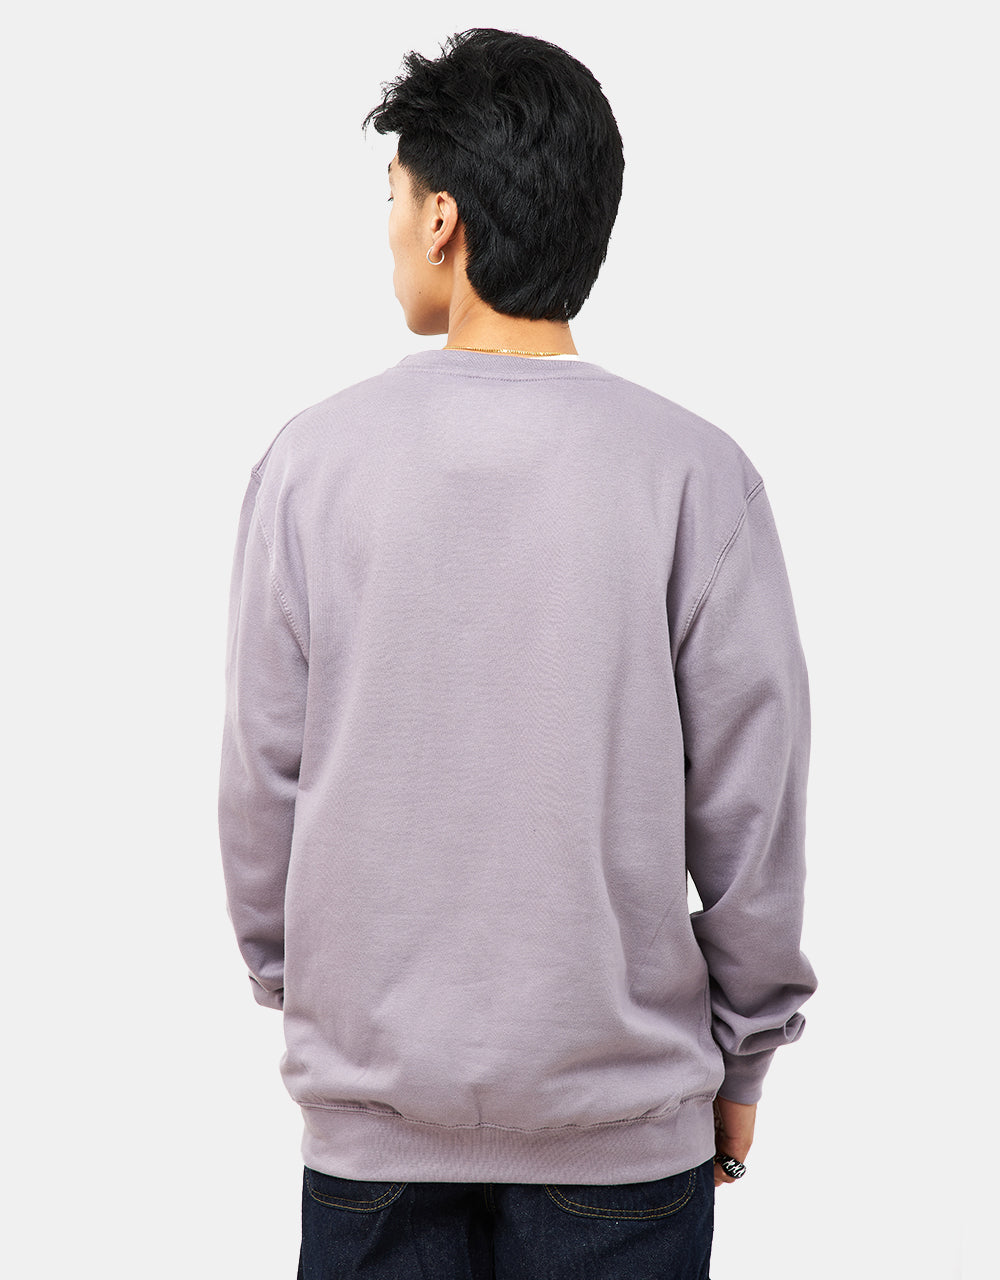 Route One Twisted Sweatshirt - Dusty Lilac